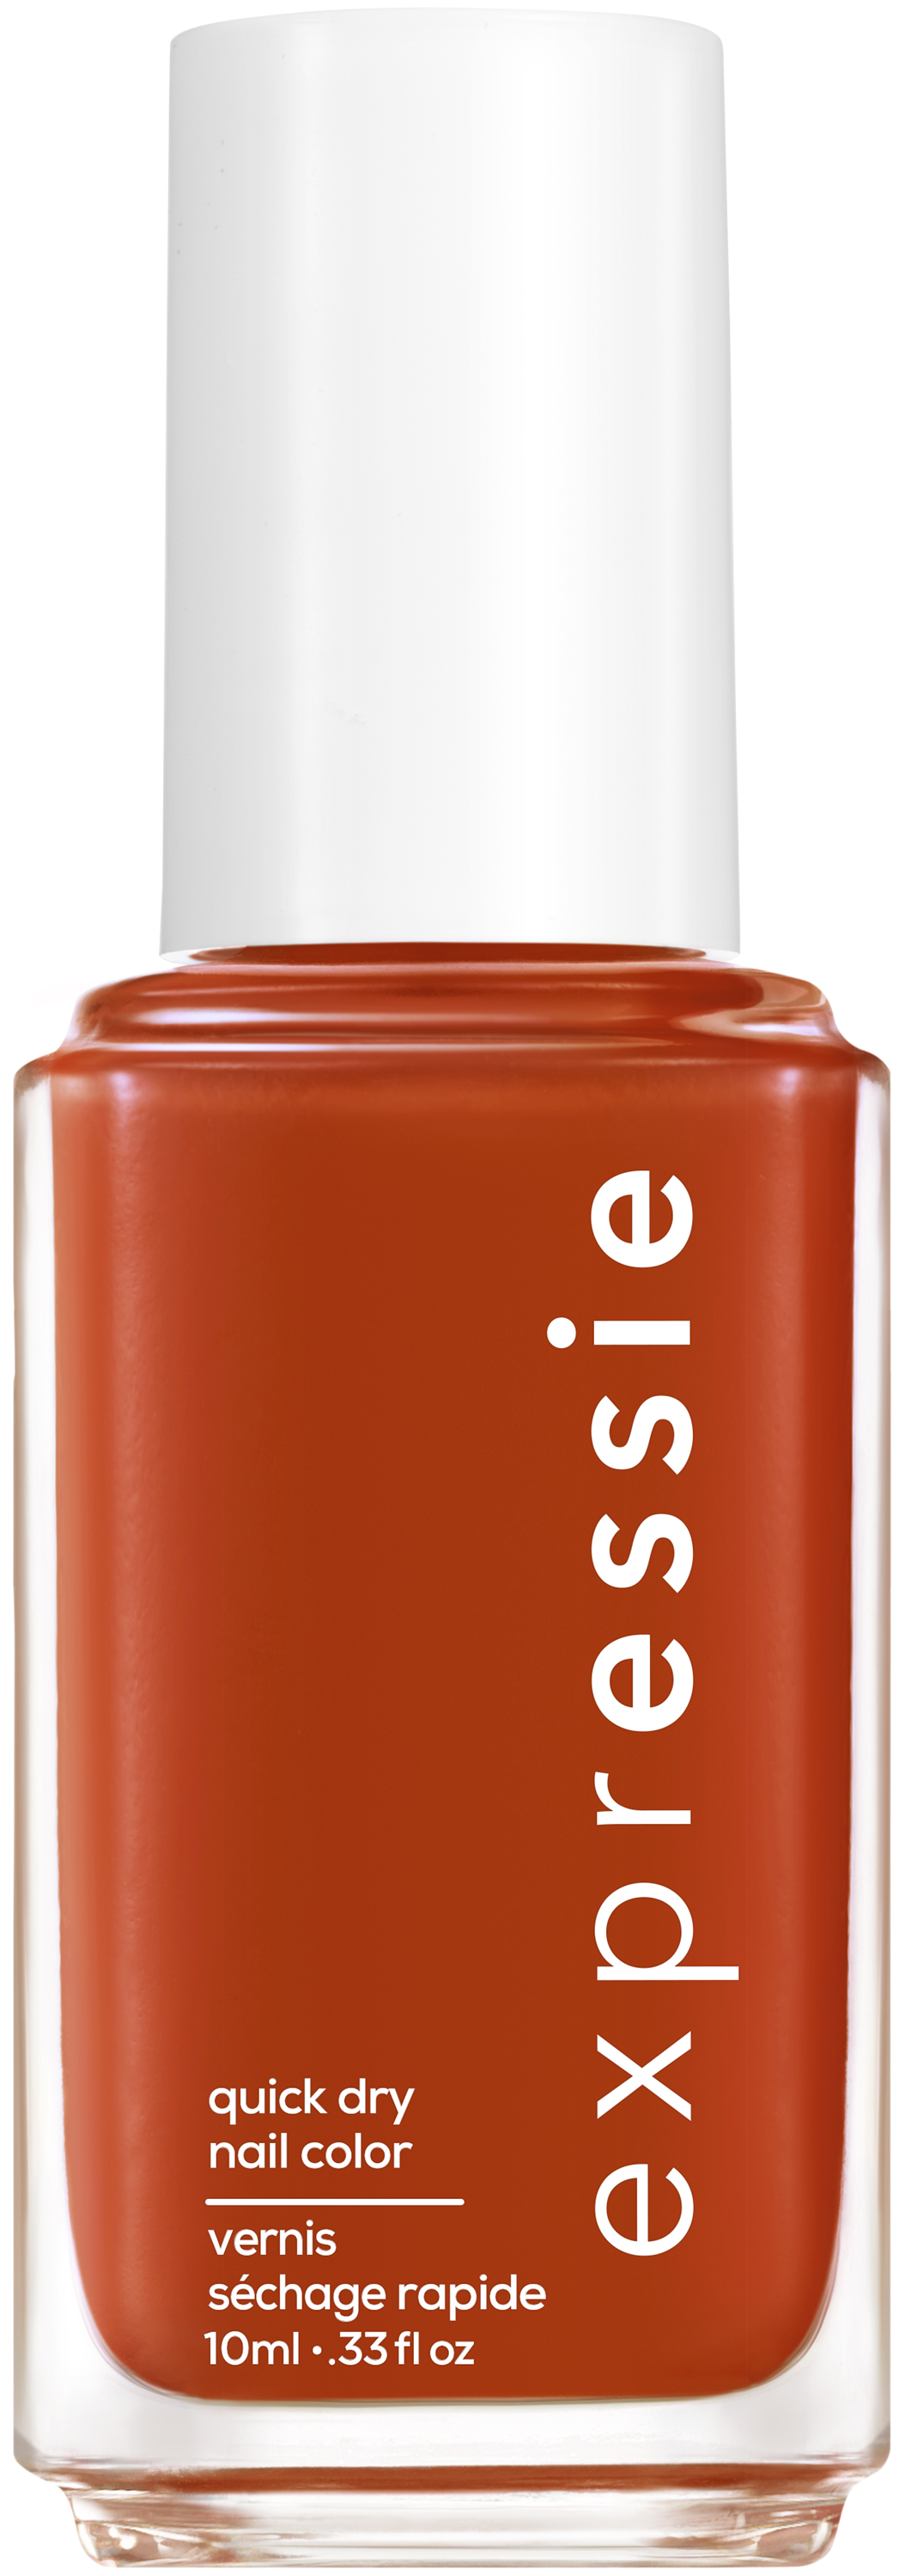 Essie Expressie Quick Dry Nail Color